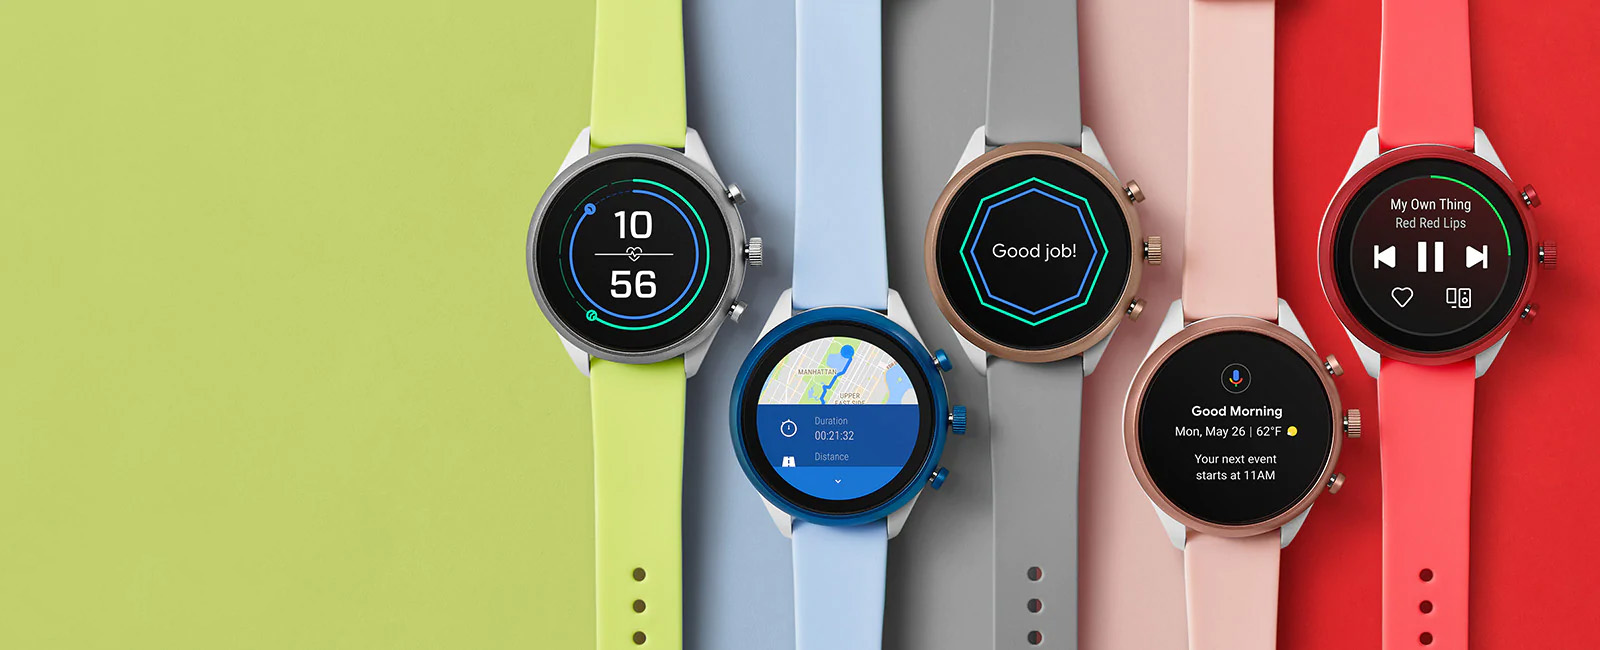 Google just spent $40 million on ‘smartwatch technology’ from Fossil ...